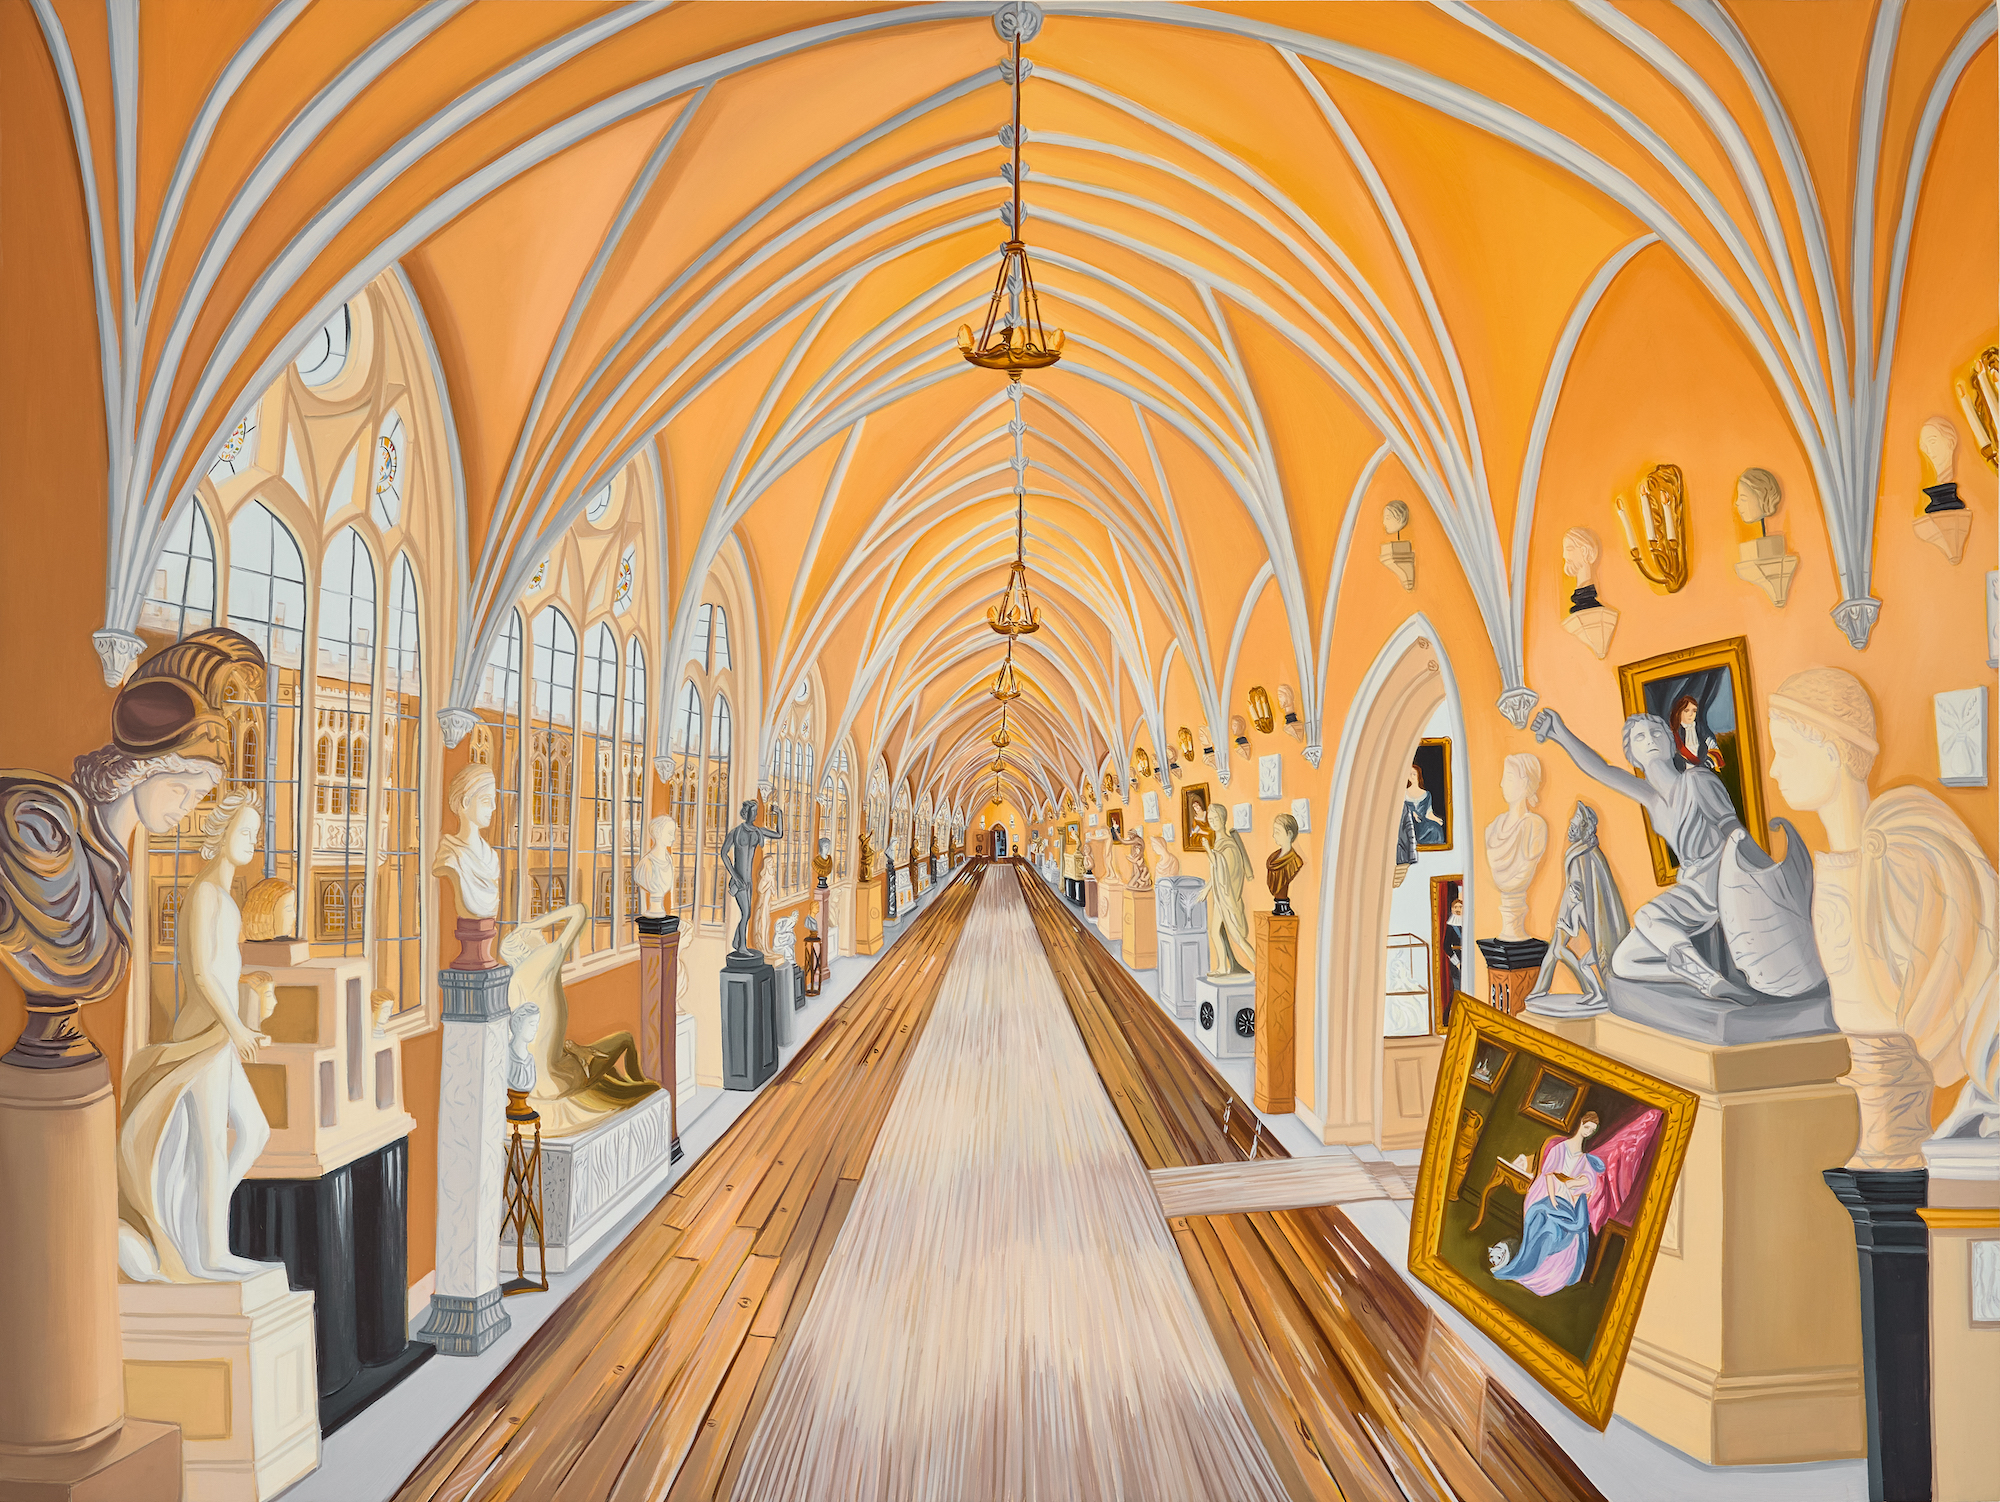 A colorful painting of a historic interior with dozens of paintings.